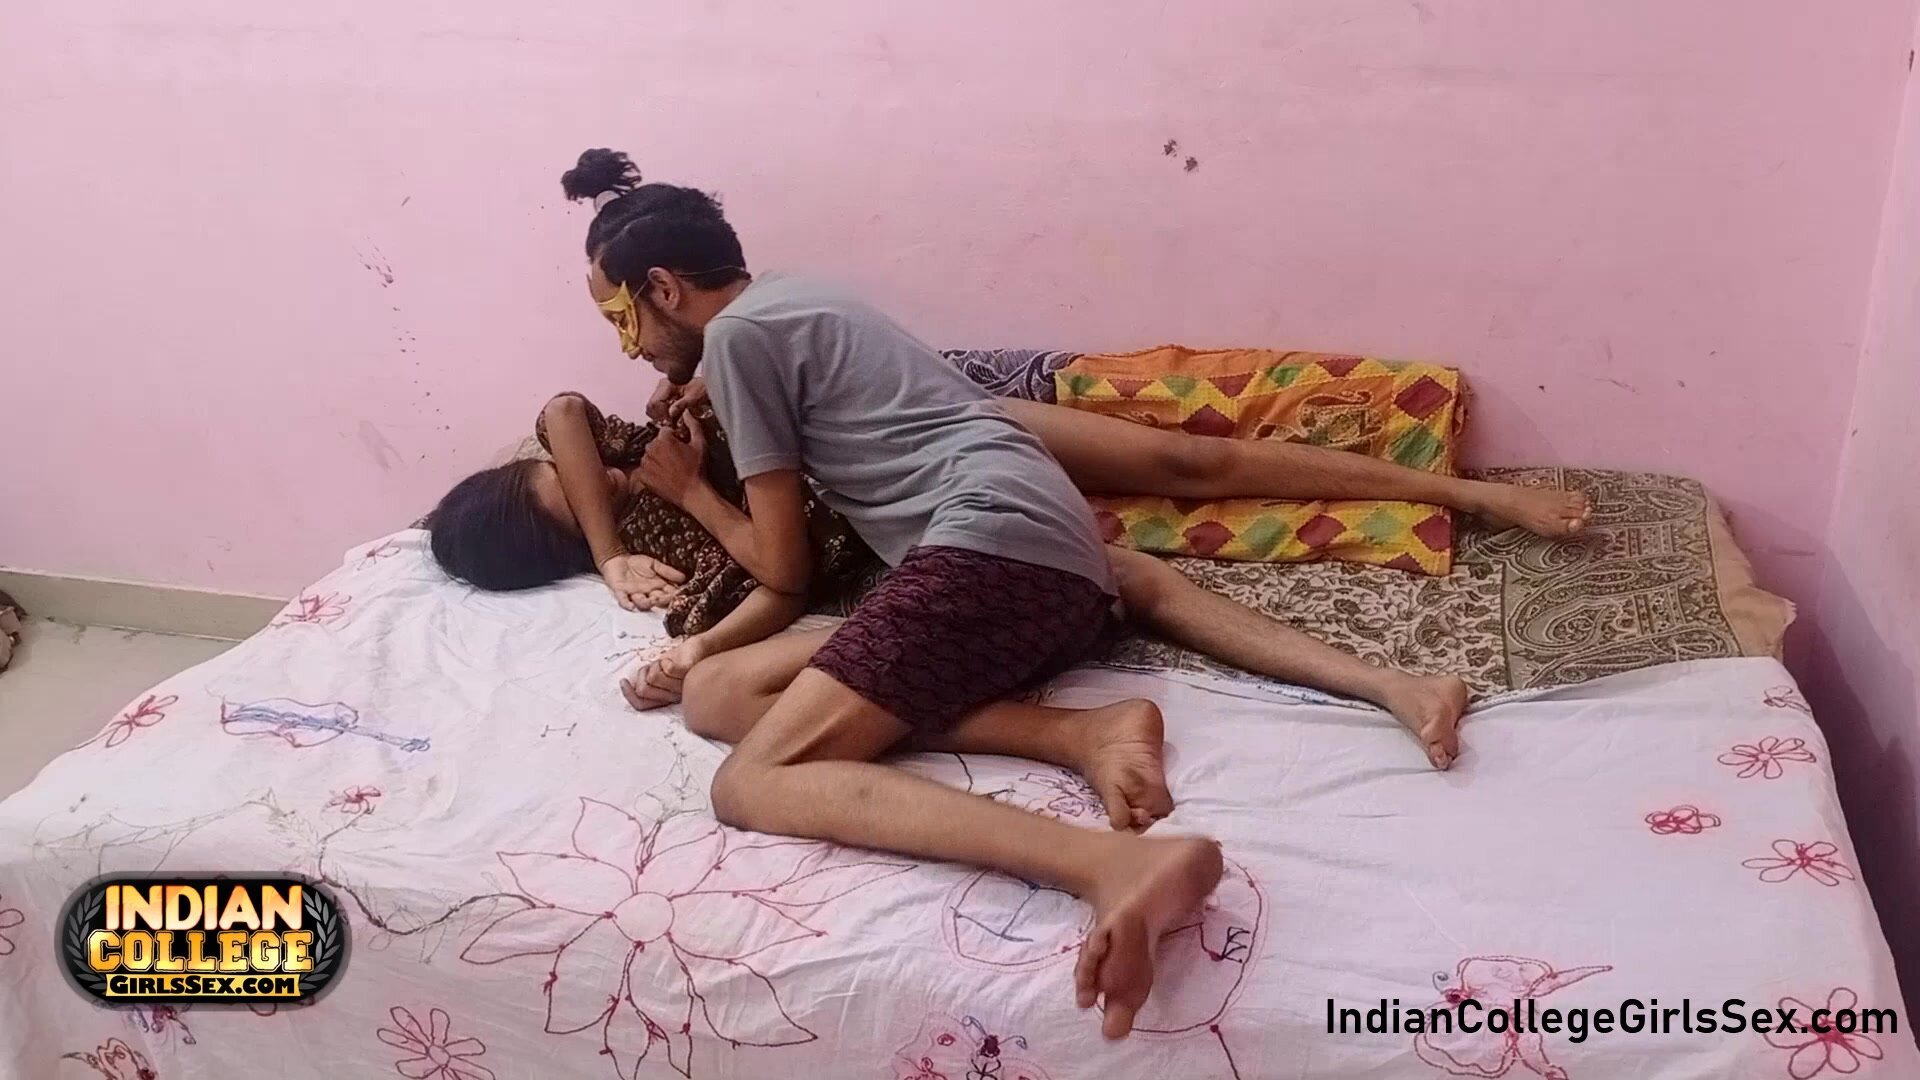 Amateur Indian skinny teen get an anal creampie after a hard desi pussy fucking sex at Fapnado picture image